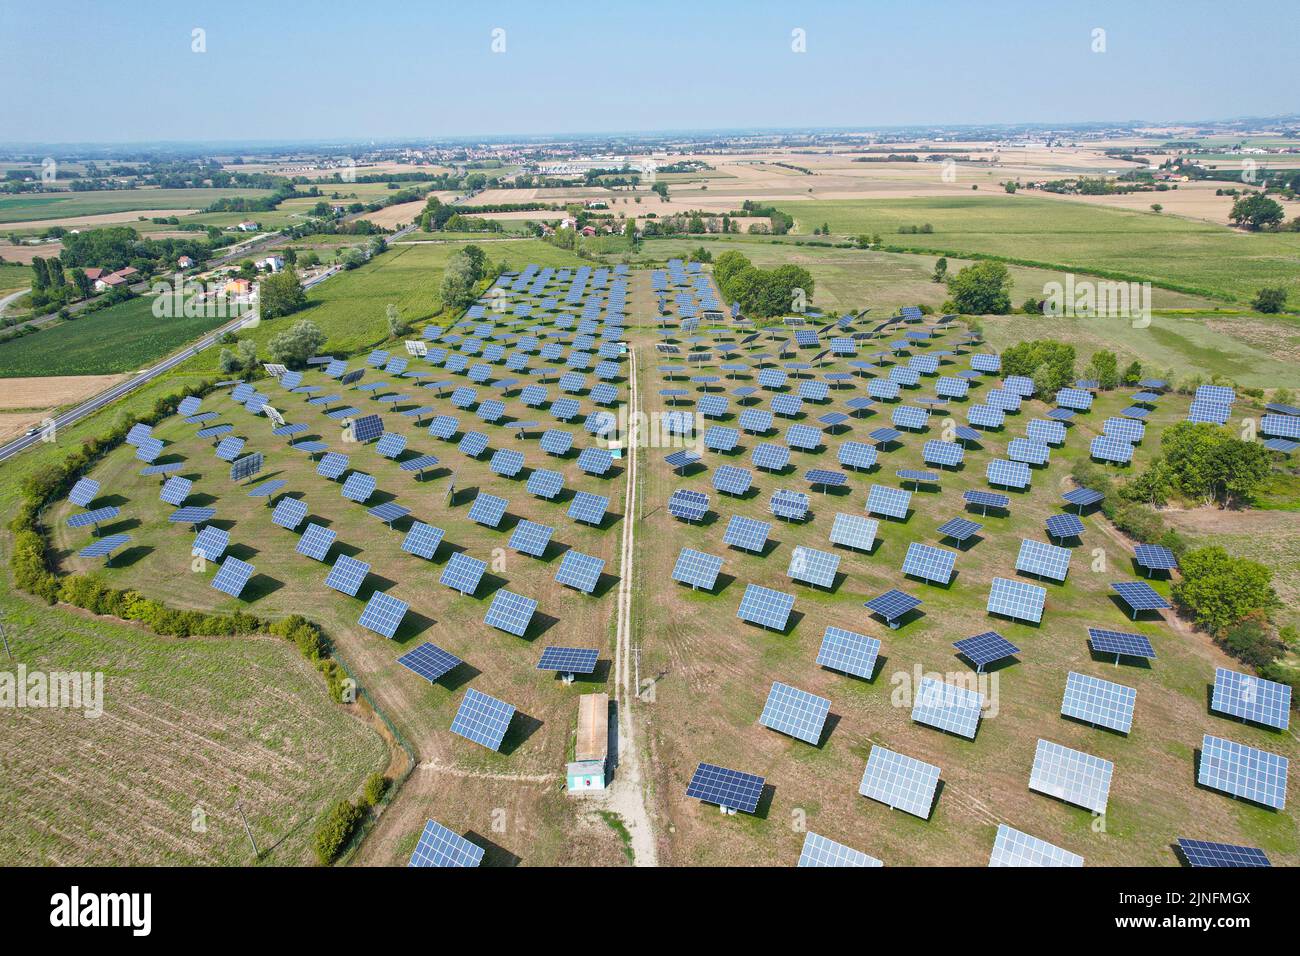 Silicon photovoltaic panels with defective single-axis tilted track system In a small solar power plant. Alessandria, Italy - August 2022 Stock Photo